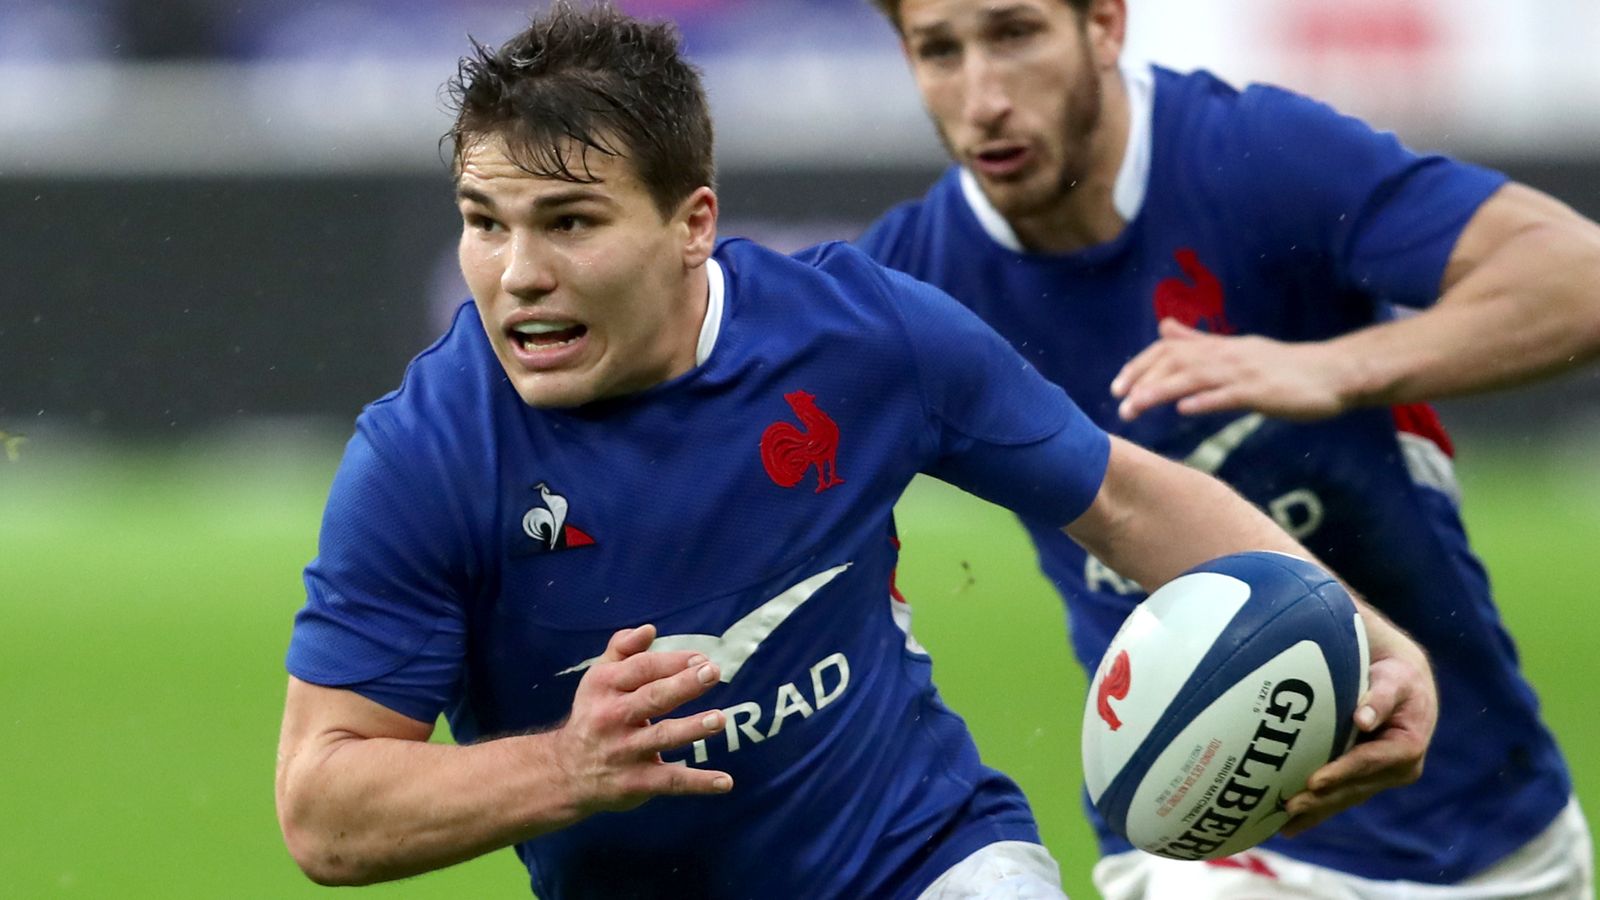 Six Nations 2021 Championship in focus: France | Rugby ...